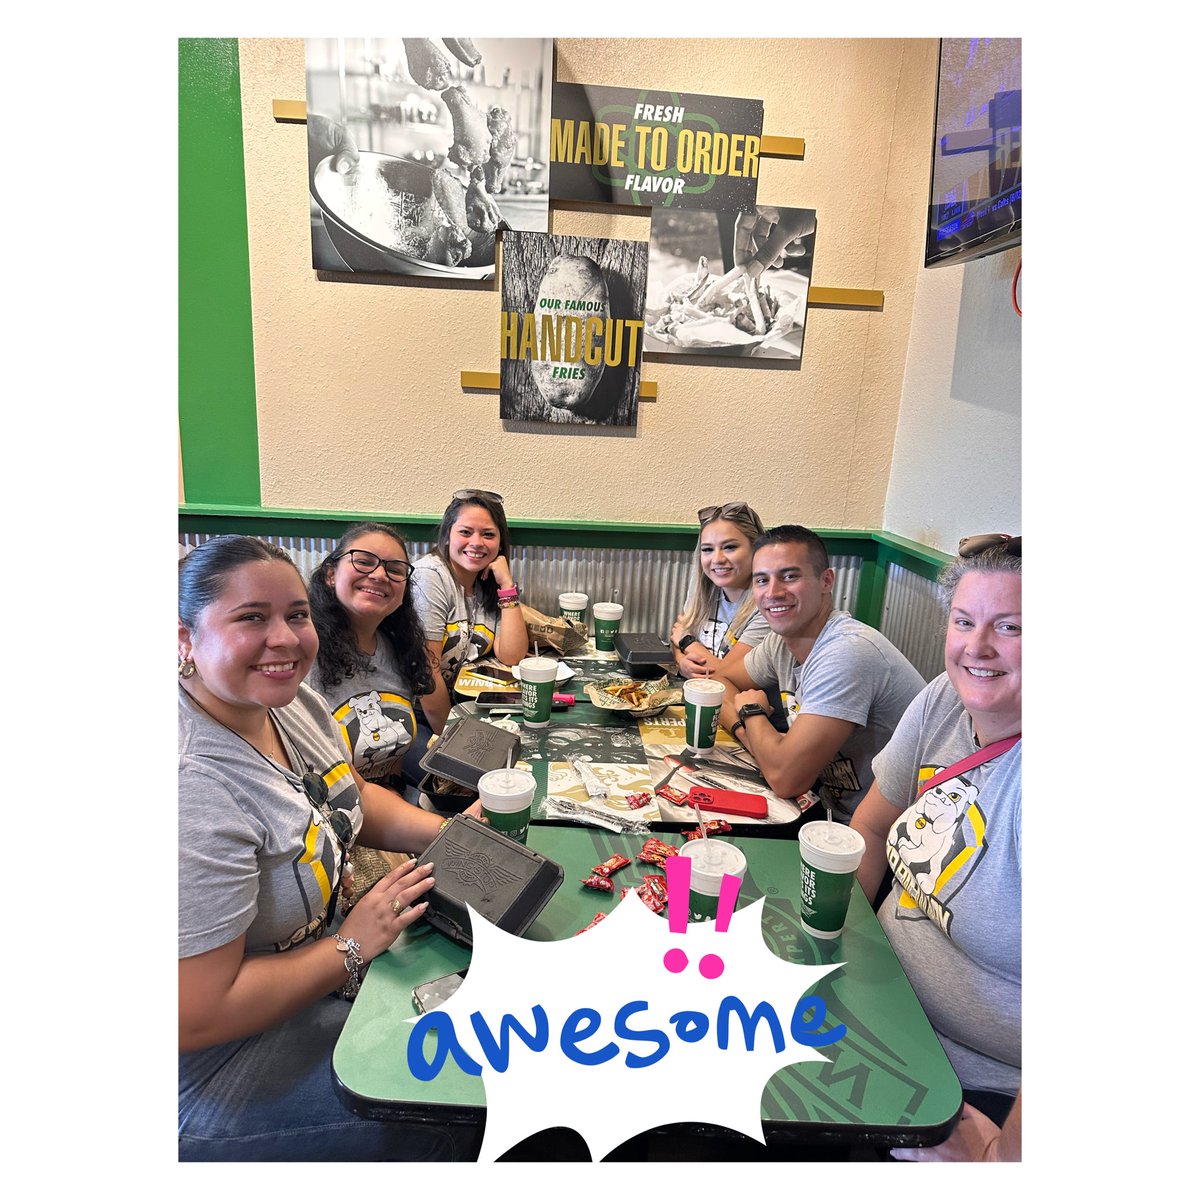 I ran into some cool teachers while grabbing a bite to eat from one of my favorite restaurant @wingstop @BlackES_AISD @nparedes2000